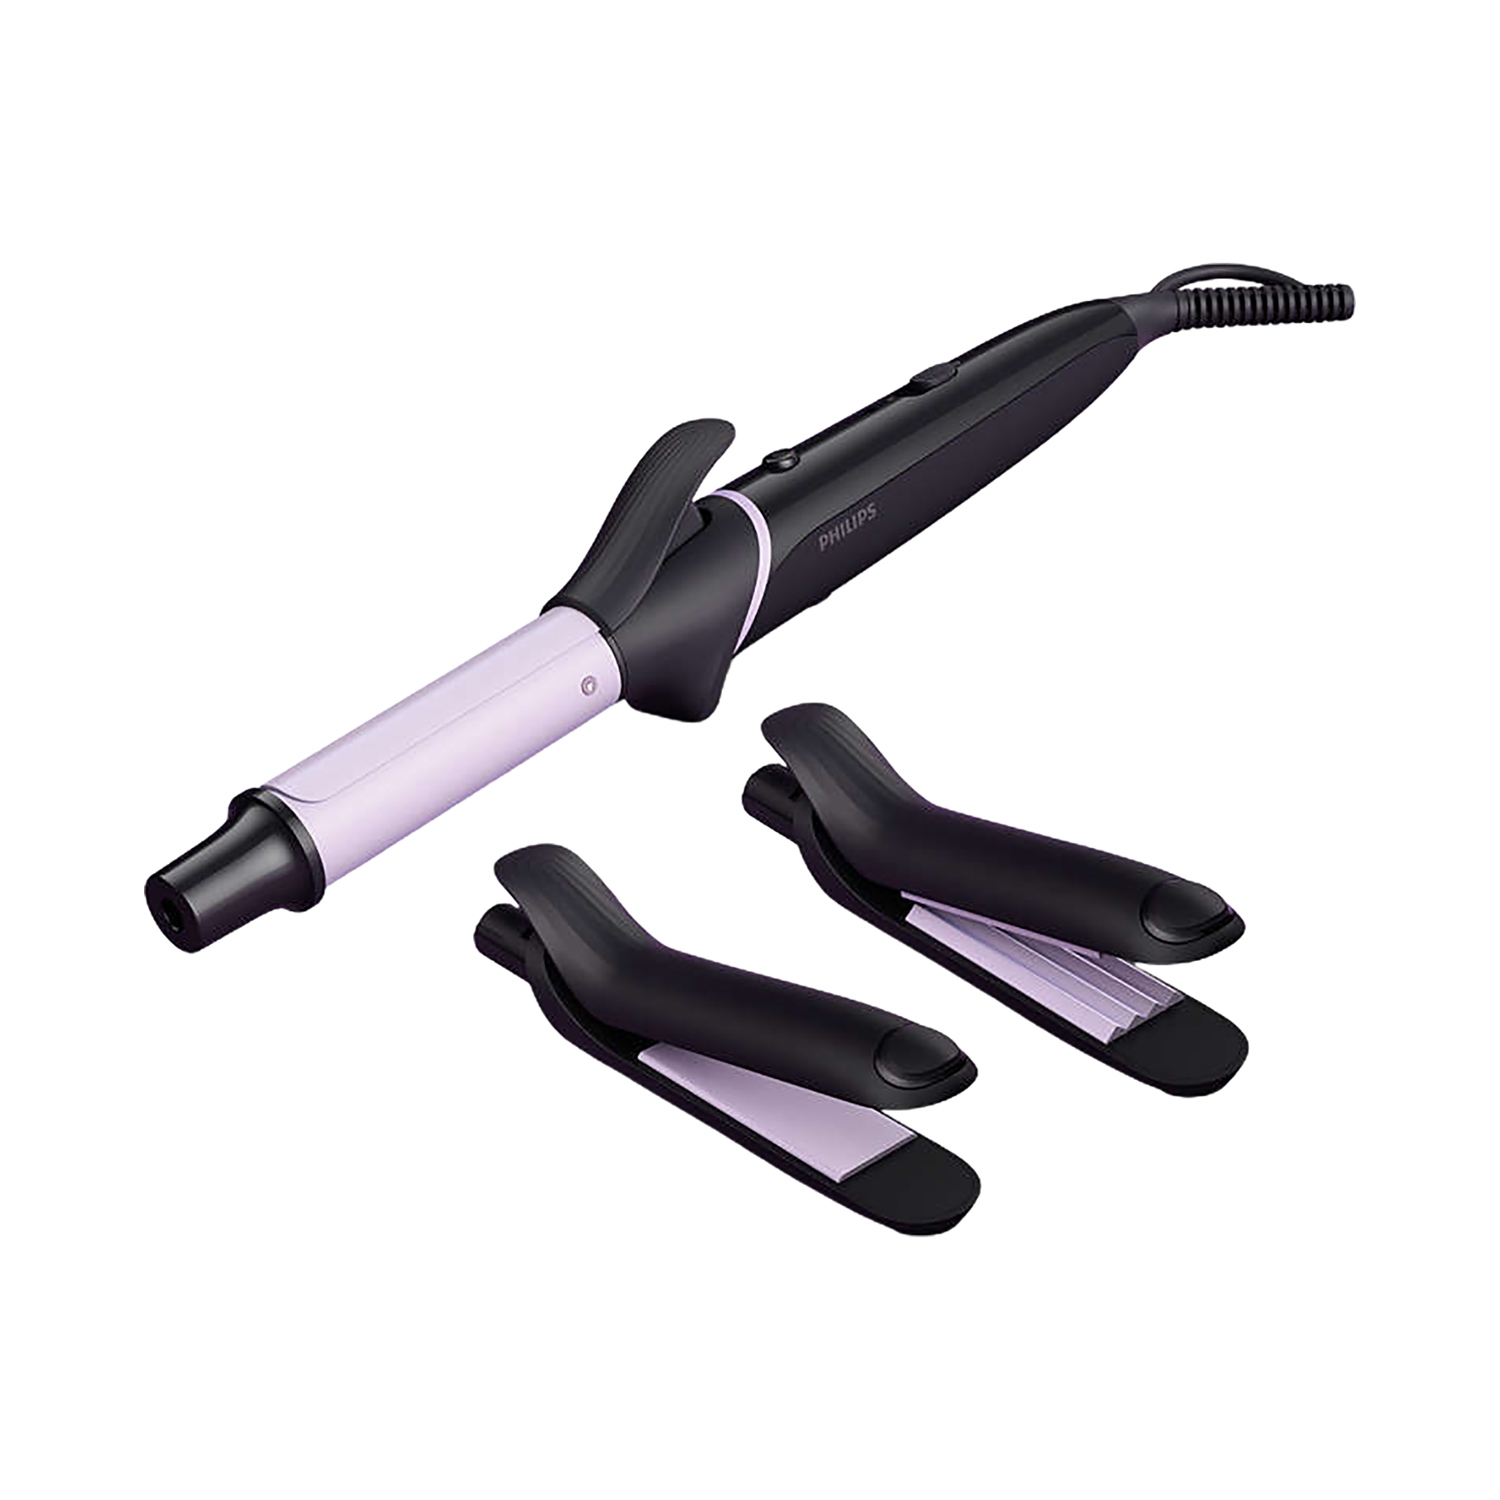 Philips | Philips Hair Styling Set Crimp, Straighten Or Curl With The Single Tool BHH816/00 - Black, Purple